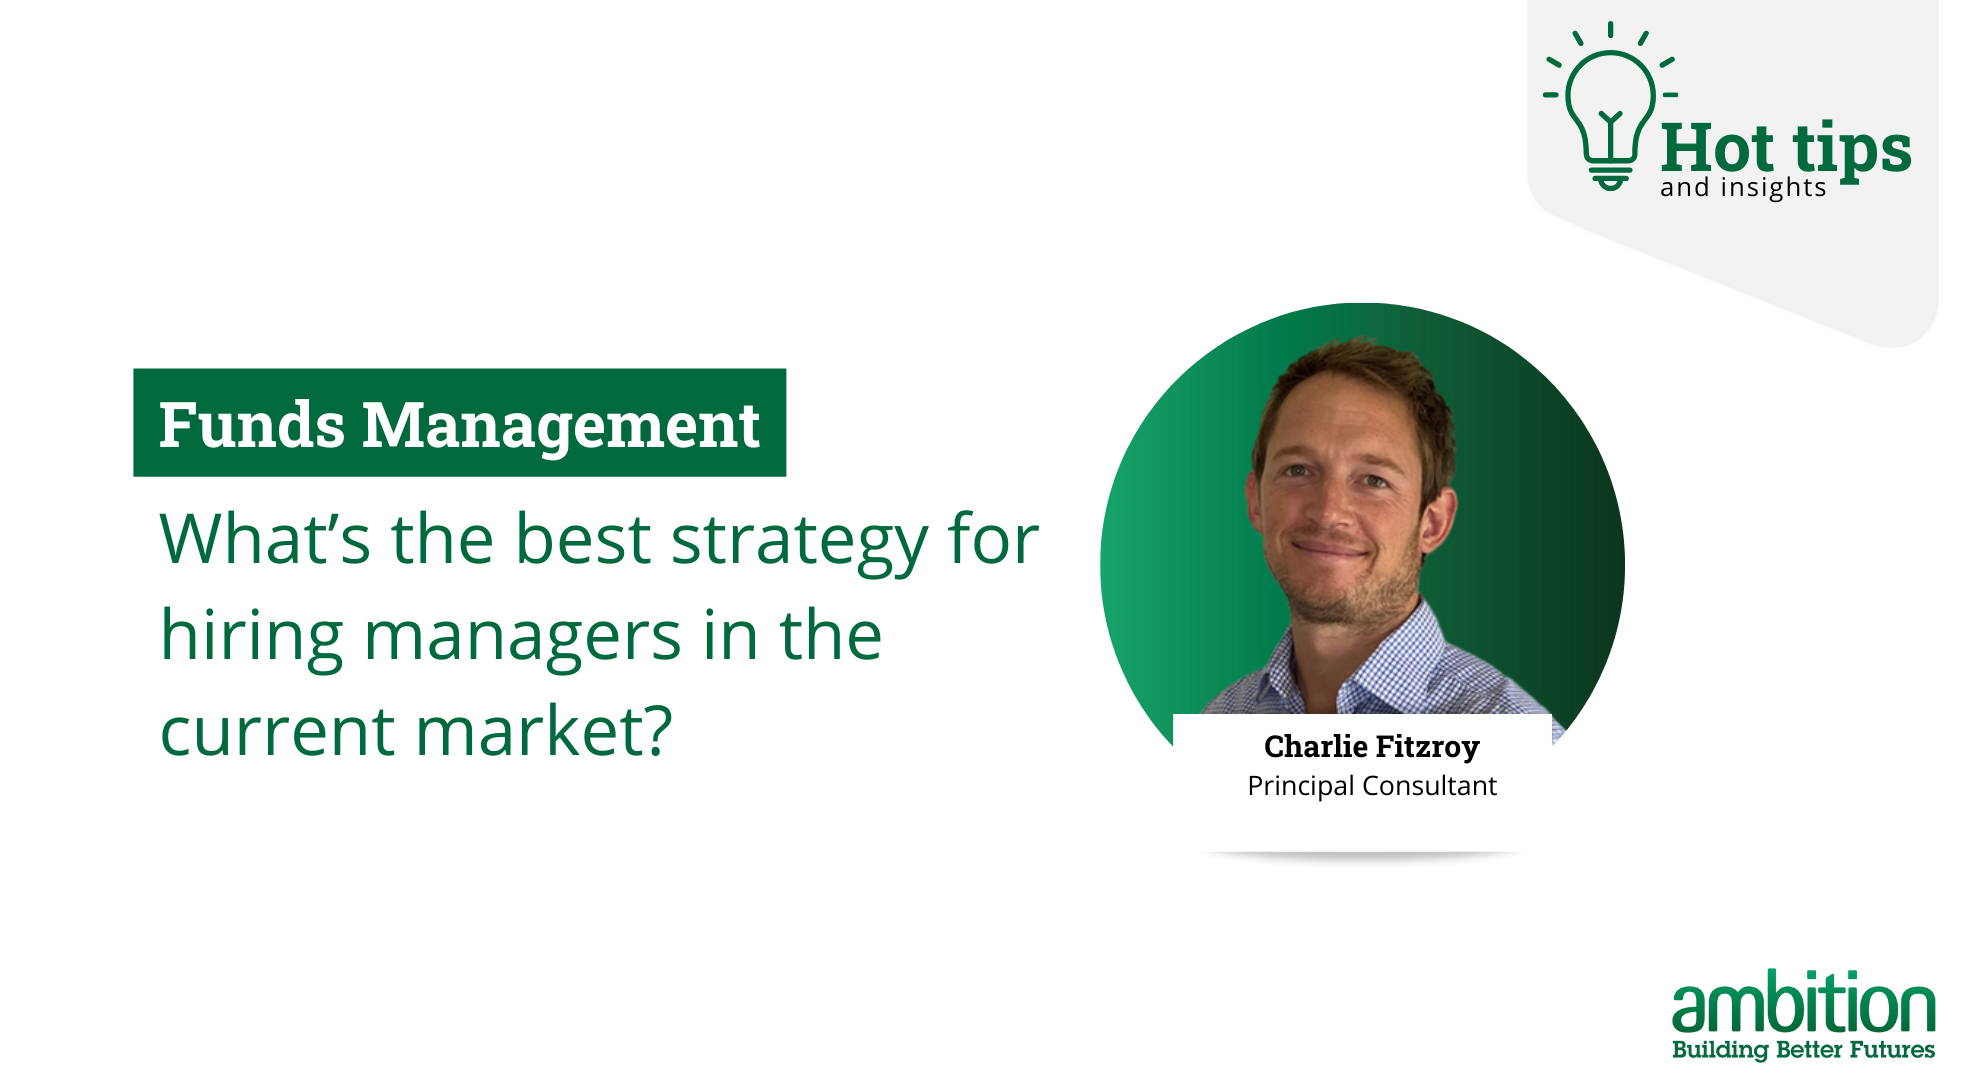 What’s the best strategy for hiring managers in the current market?